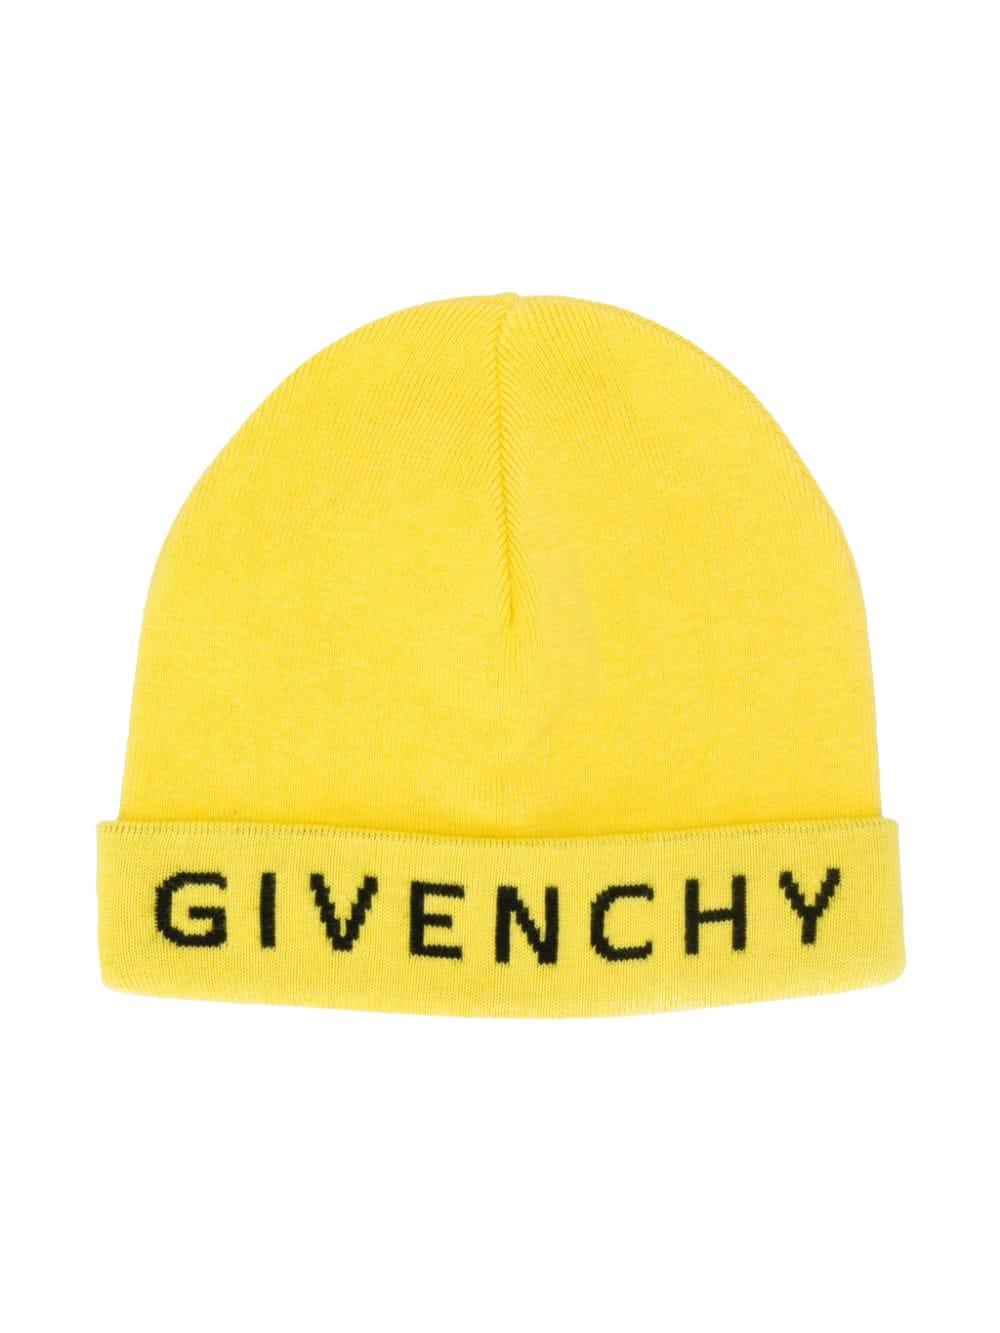 Givenchy Logo Beanie Hat in Yellow for Men - Save 33% - Lyst